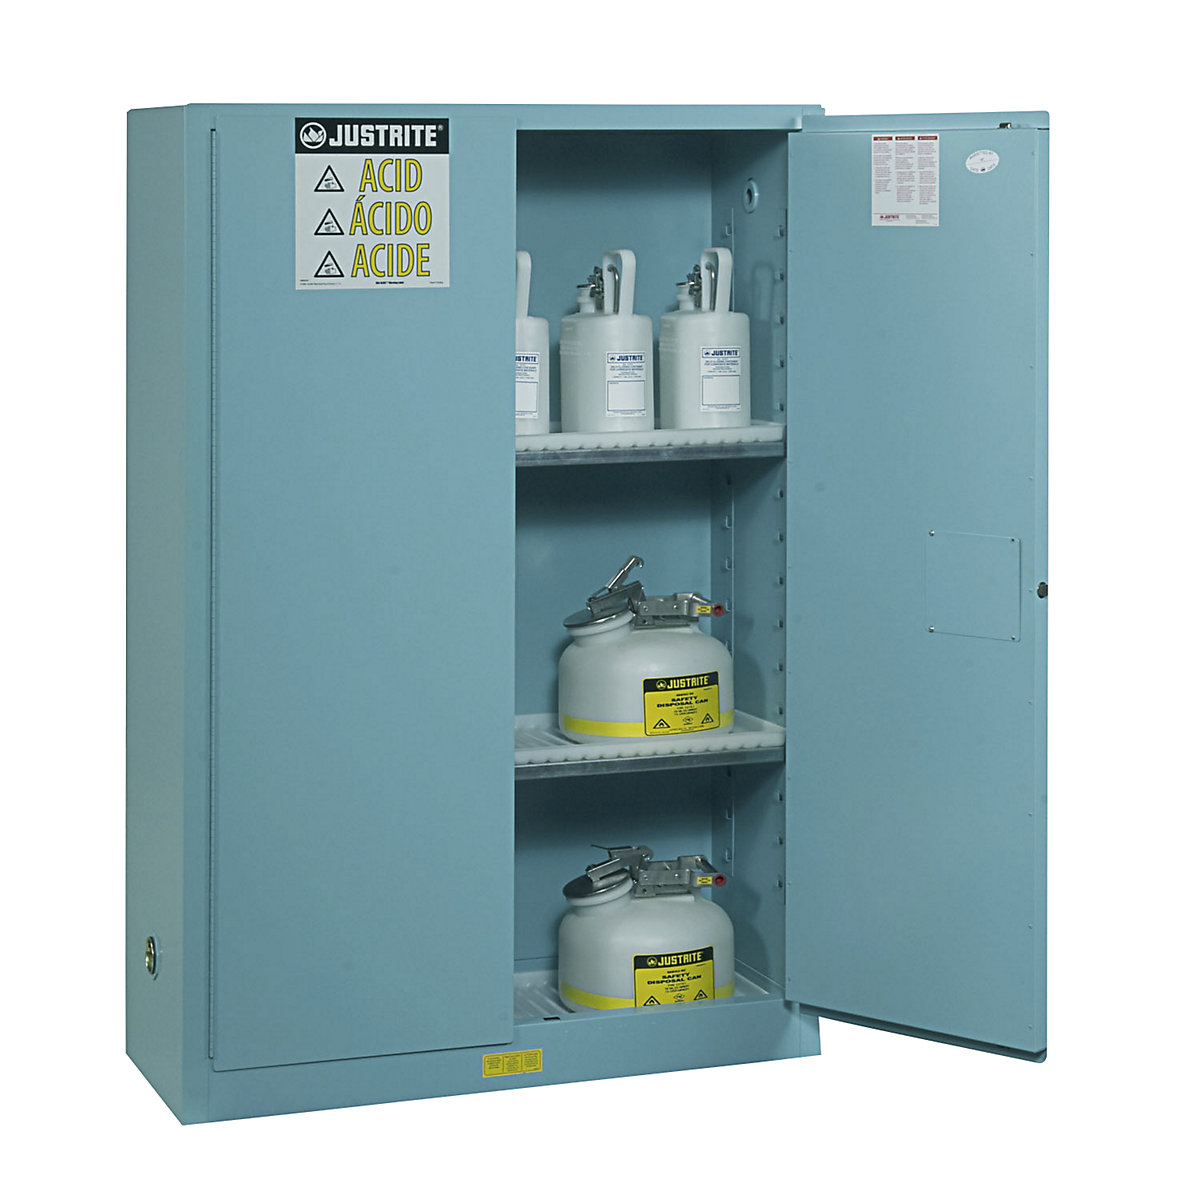 FM safety cupboards – Justrite, HxWxD 1651 x 1092 x 457 mm, manual doors, for acids, alkalis, blue-1